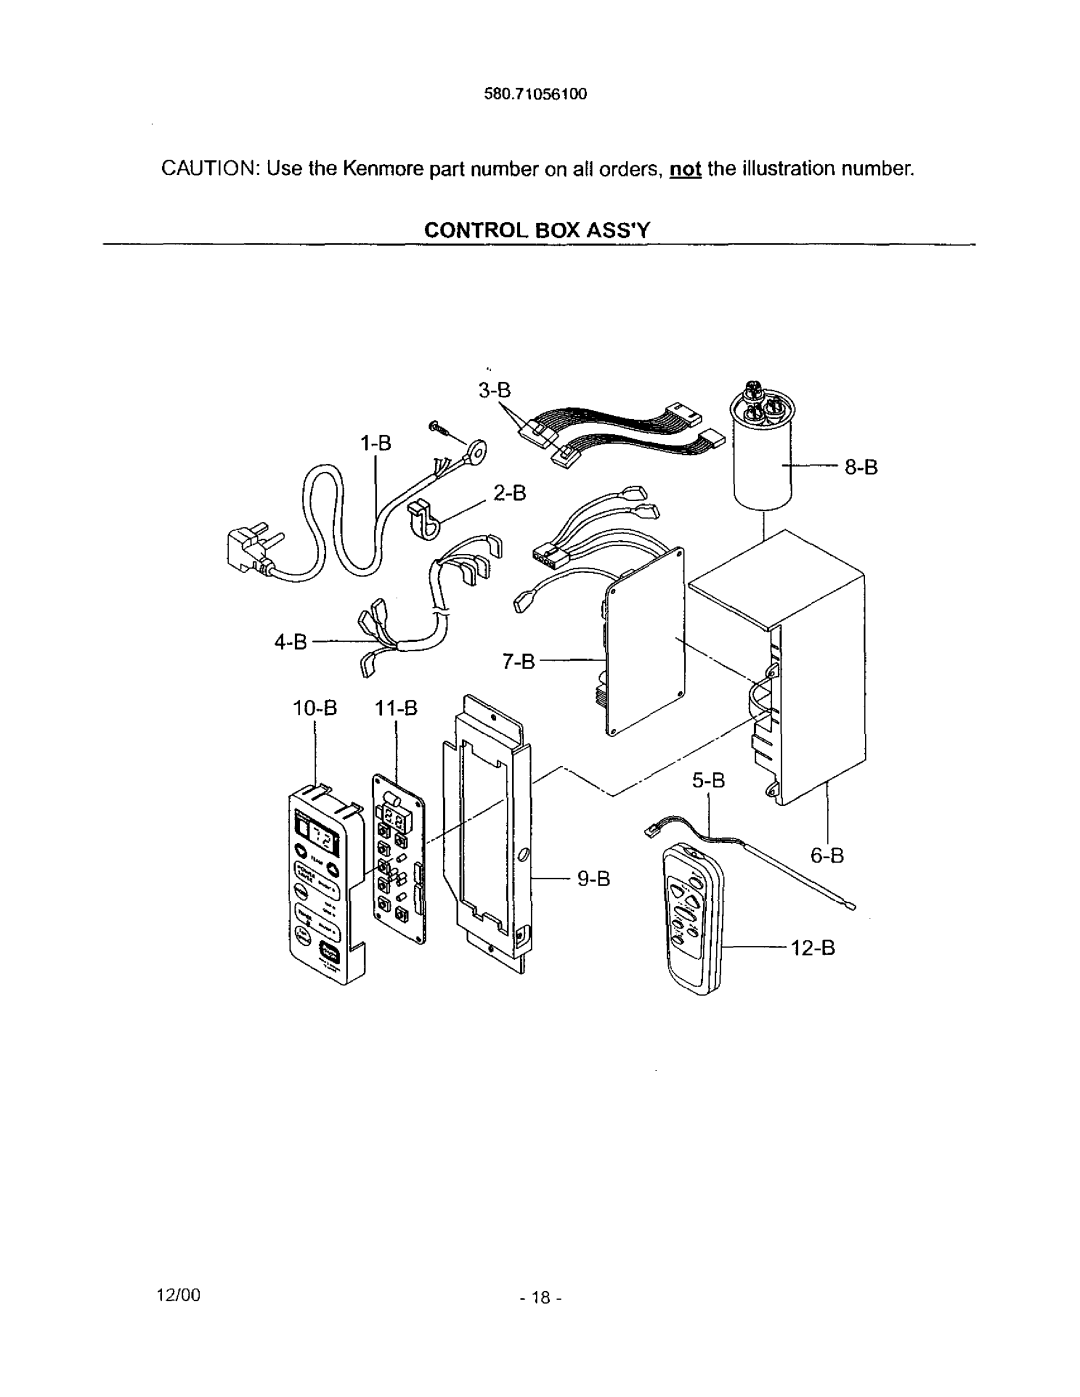 Kenmore owner manual no ttheillustrationnumber, Controlbox Assy, 580.71056100 